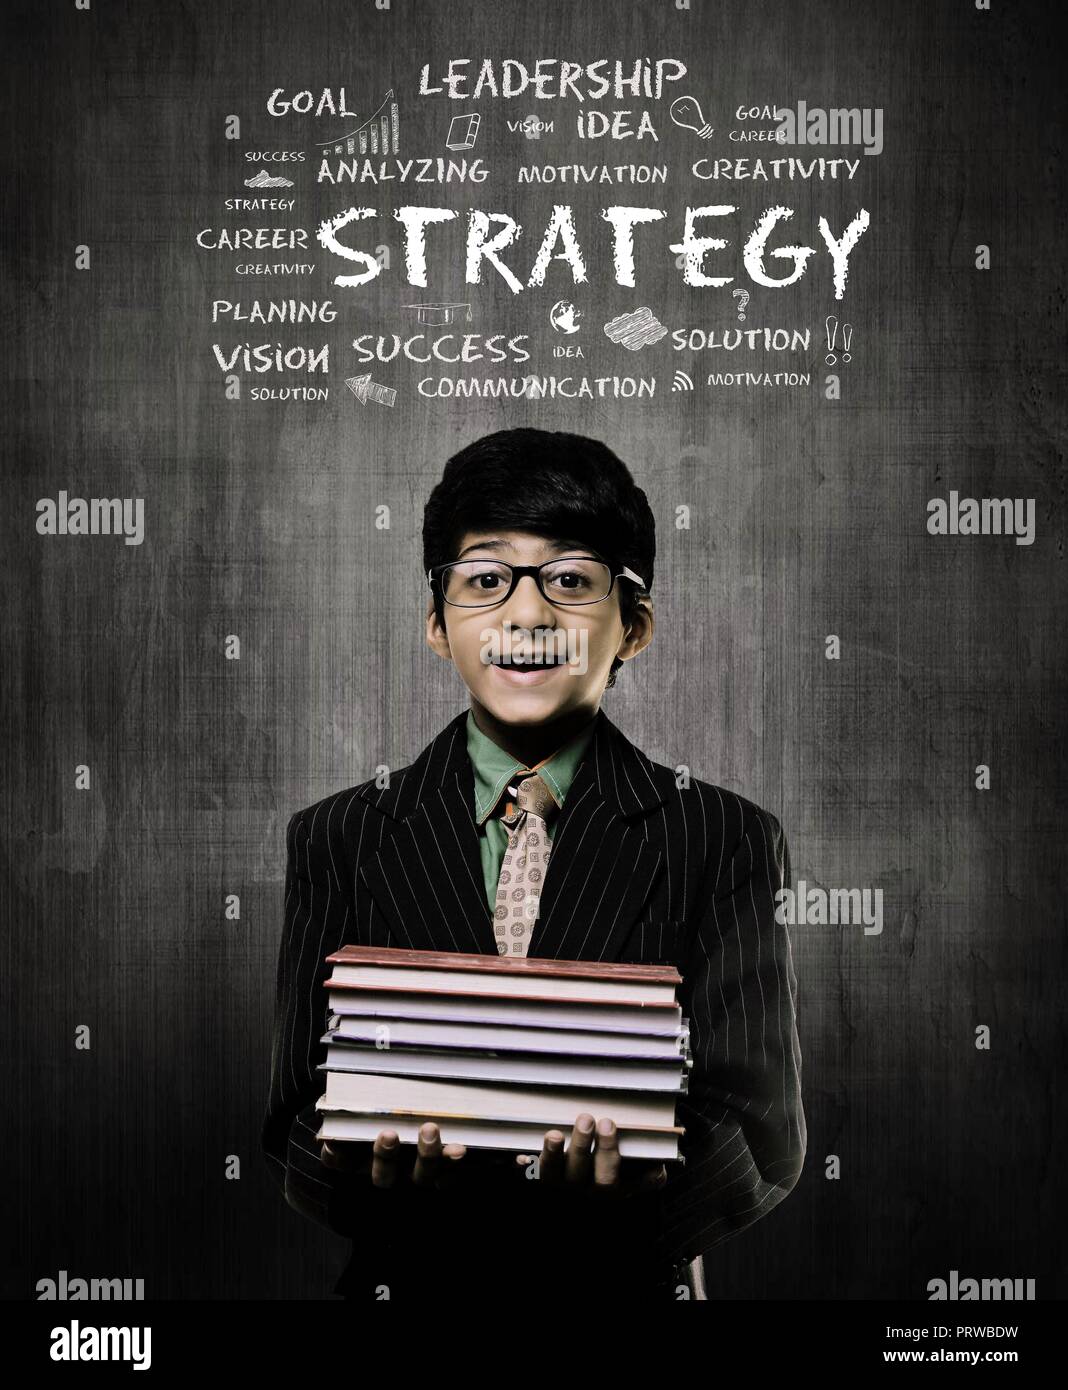 Cute Intelligent Little Boy Holding Books And Wearing Glasses, Smiling While Standing Before A Chalkboard,  Strategy written on board Stock Photo